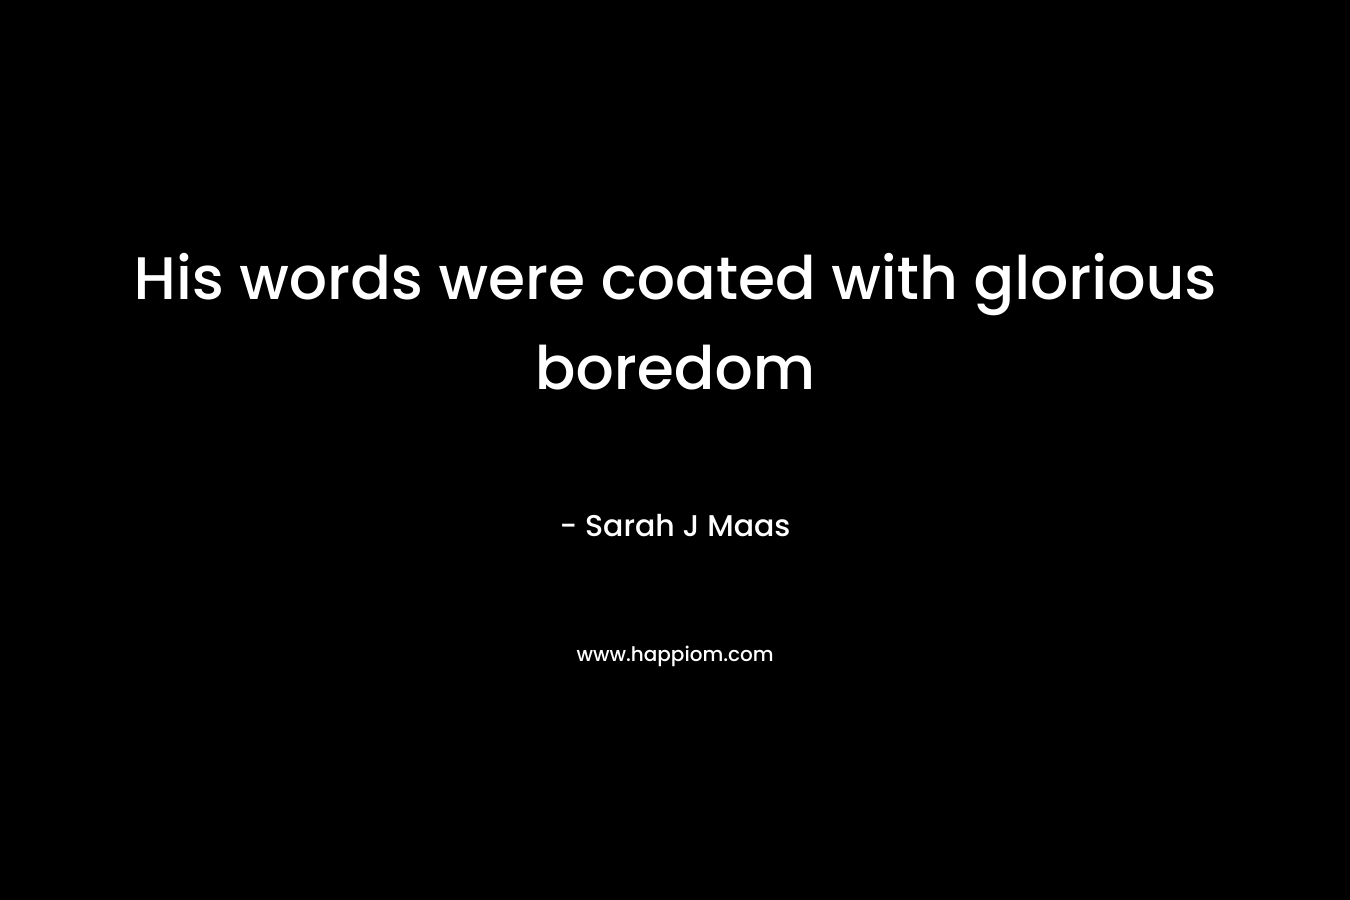 His words were coated with glorious boredom